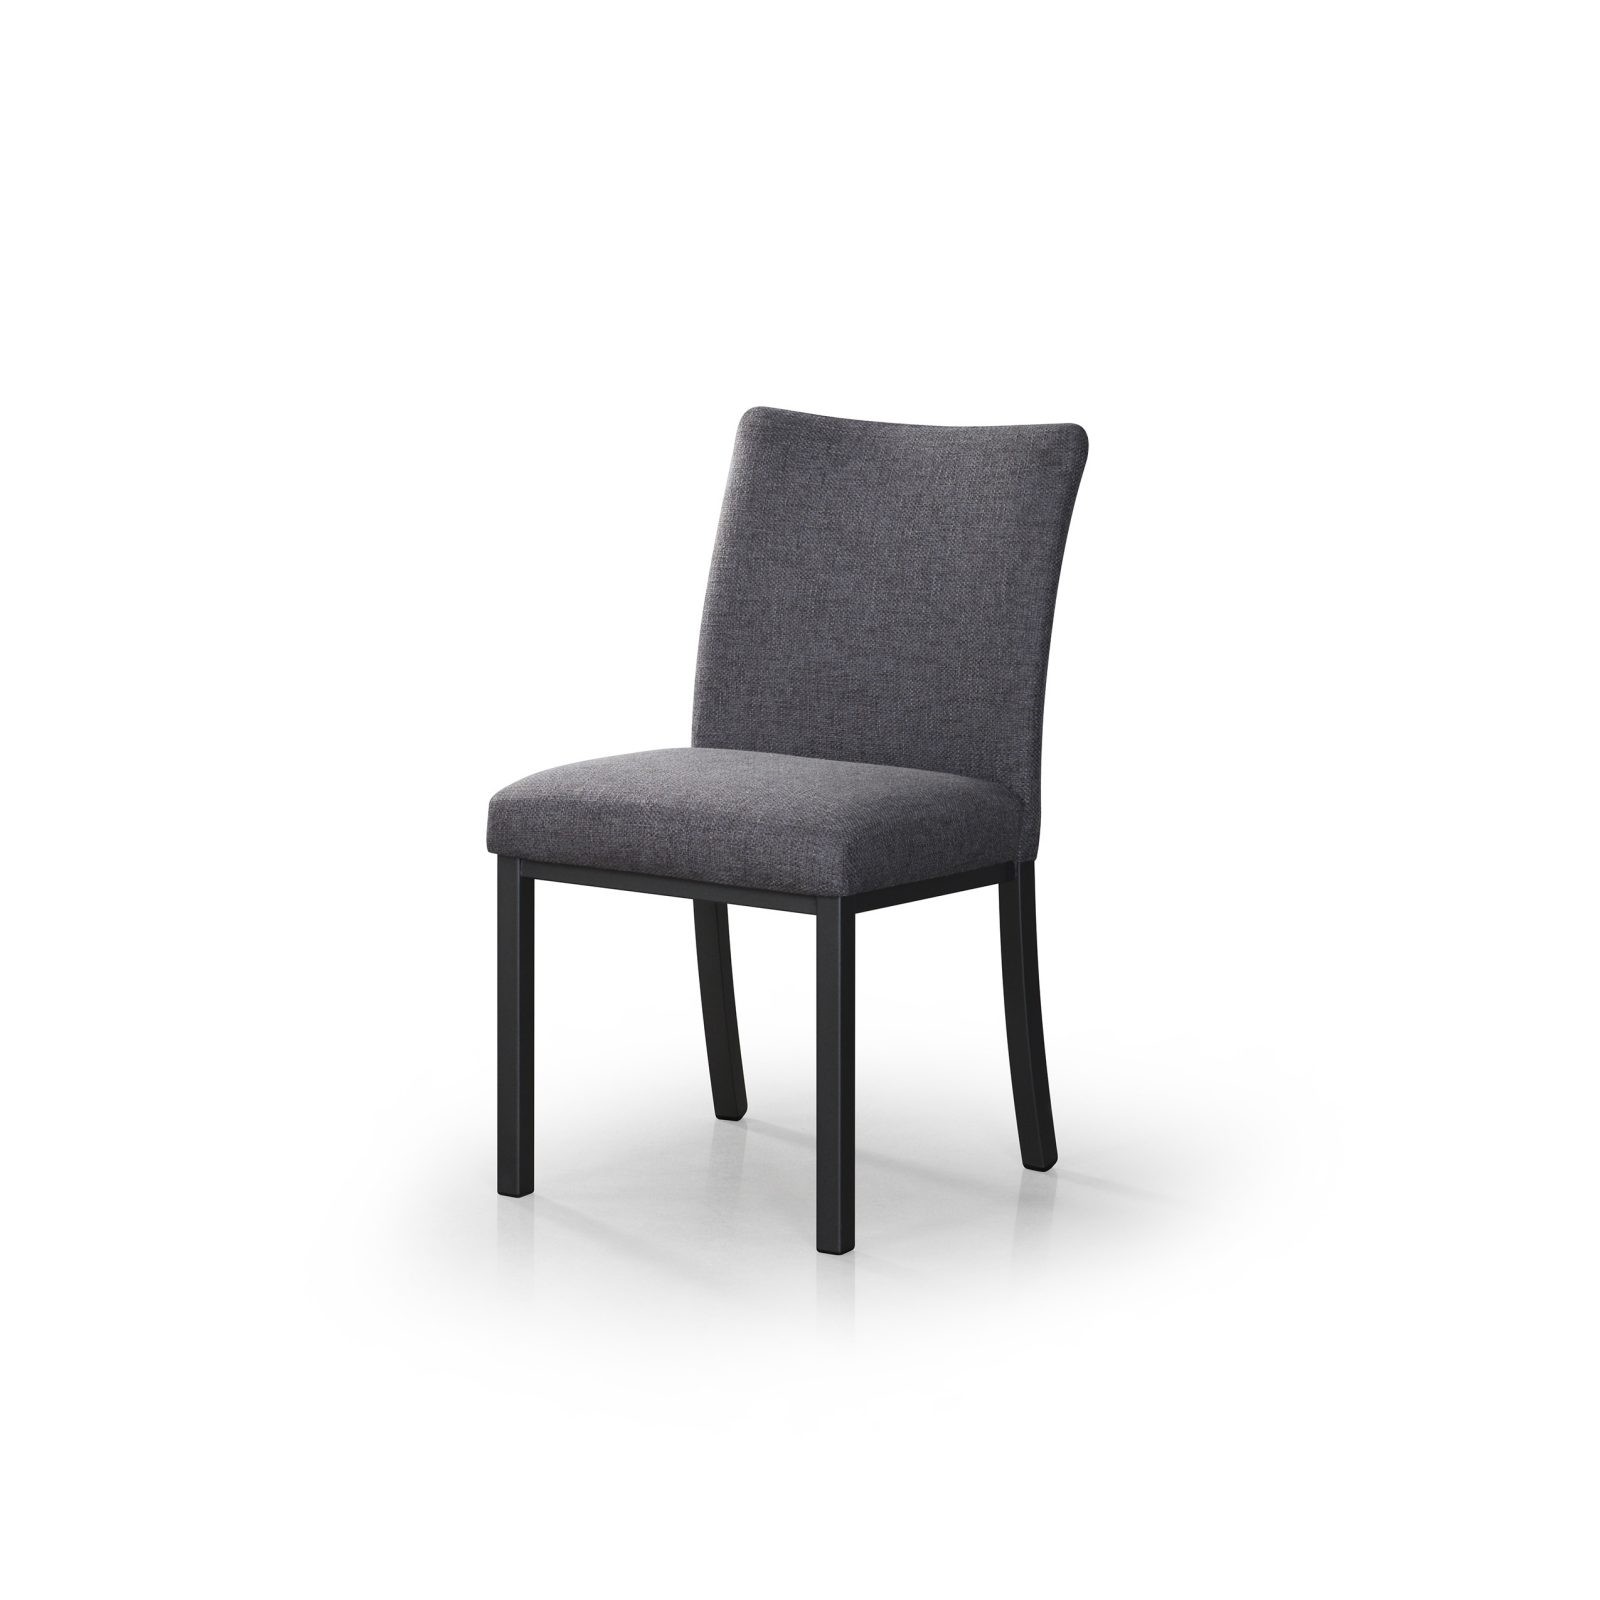 Trica Biscaro Chair